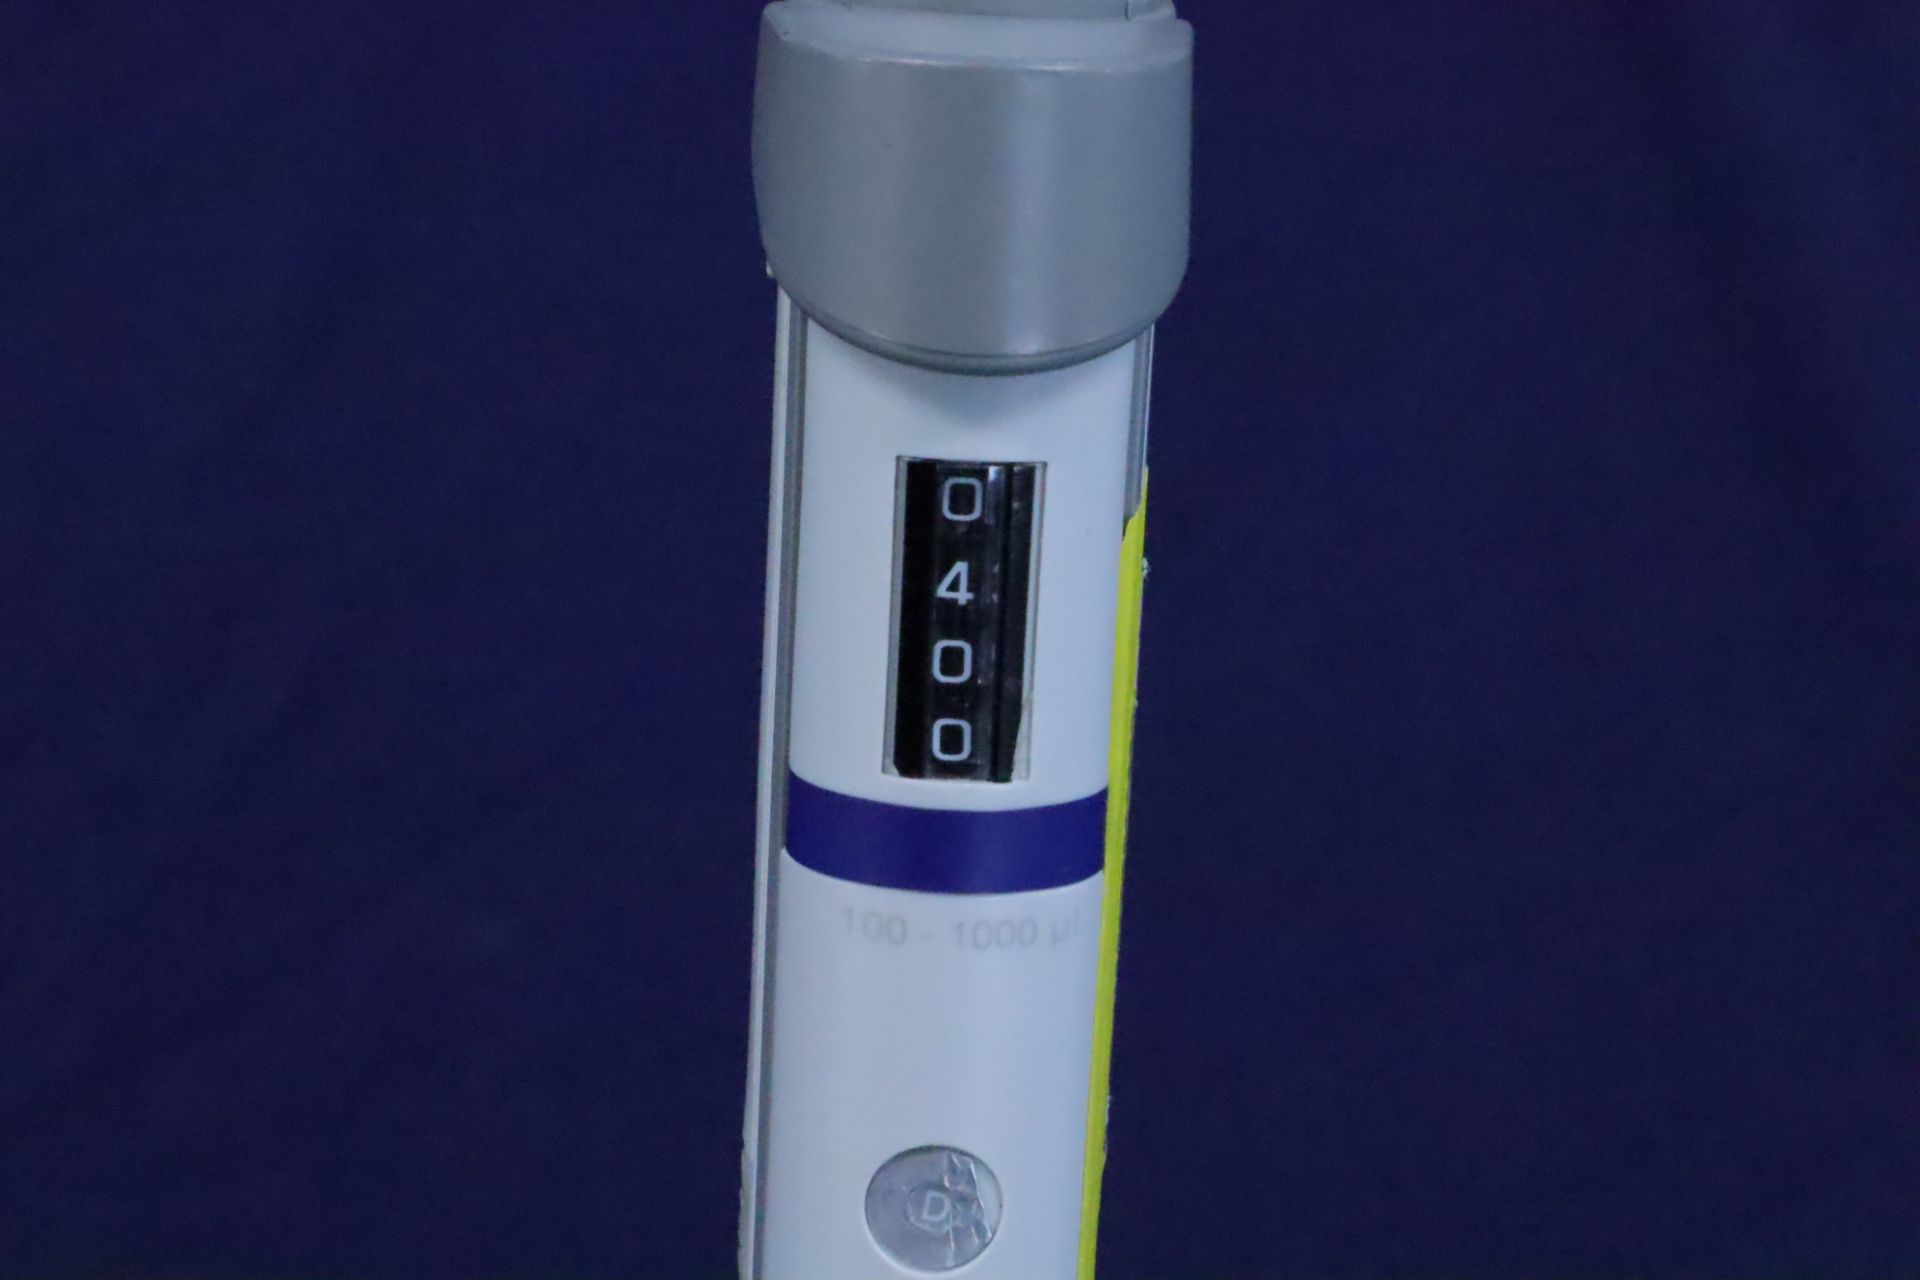 Eppendorf Research Plus Adjustable Volume Pipette 100-1000 uL - Image 3 of 4